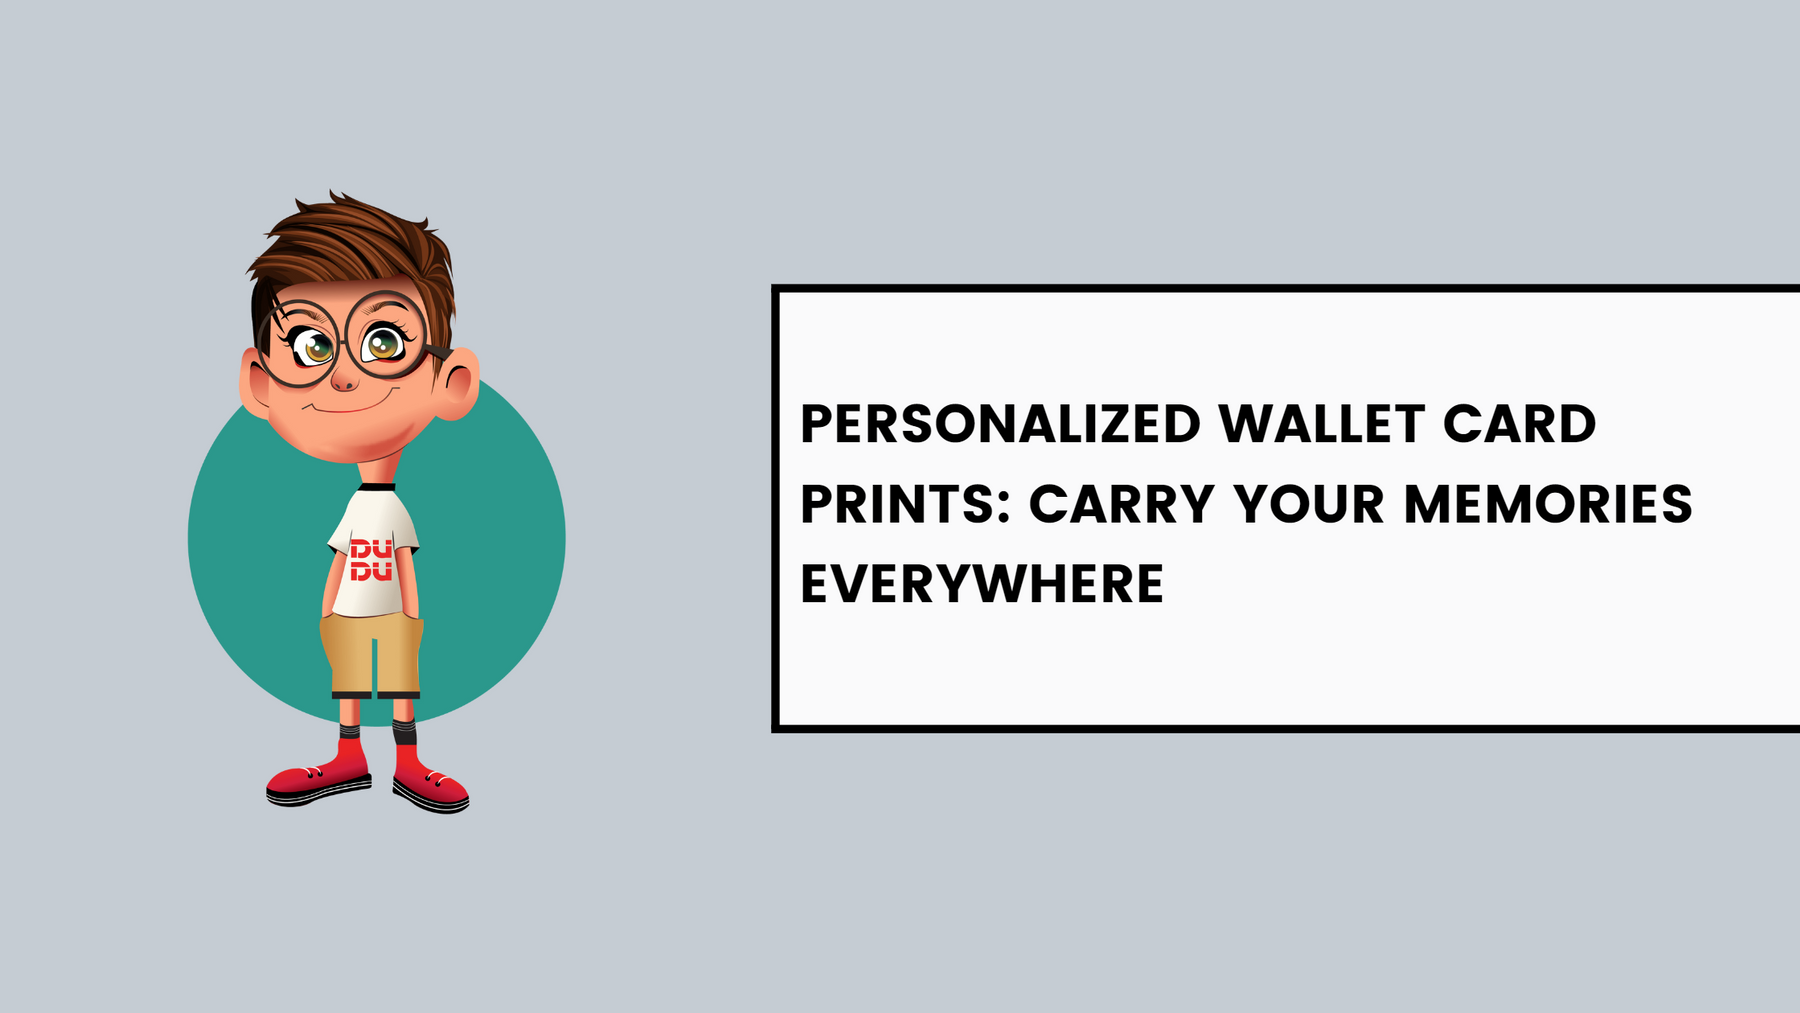 Personalized Wallet Card Prints: Carry Your Memories Everywhere